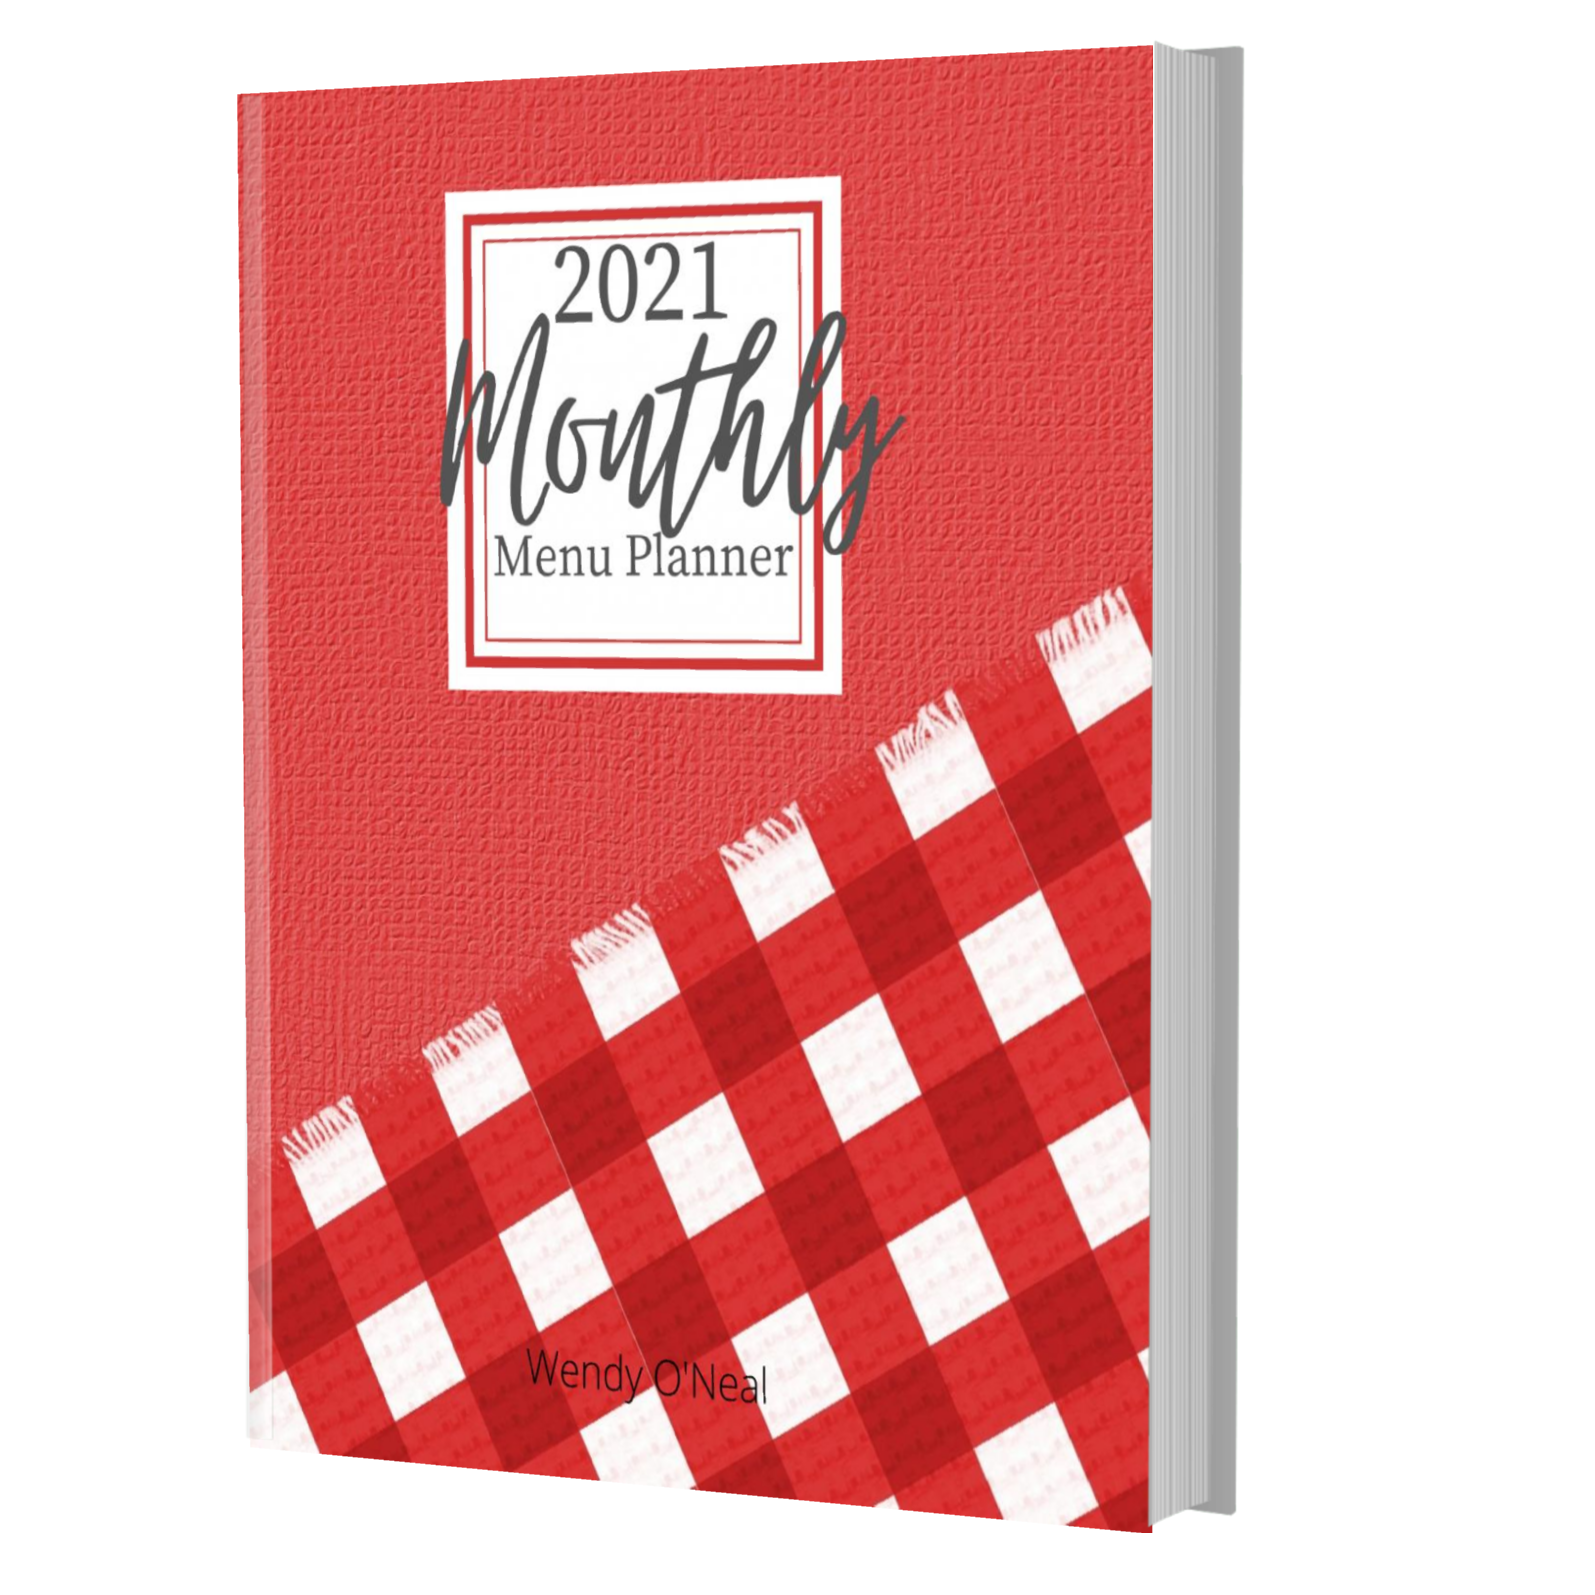 Don't let busy schedules keep you from planning healthy meals for your family.  Get a handle on menu planning, shopping, and recipe list with this colorful 8 1/2 x 11 Menu Planner. Order your menu planning journal TODAY. via @slingmama